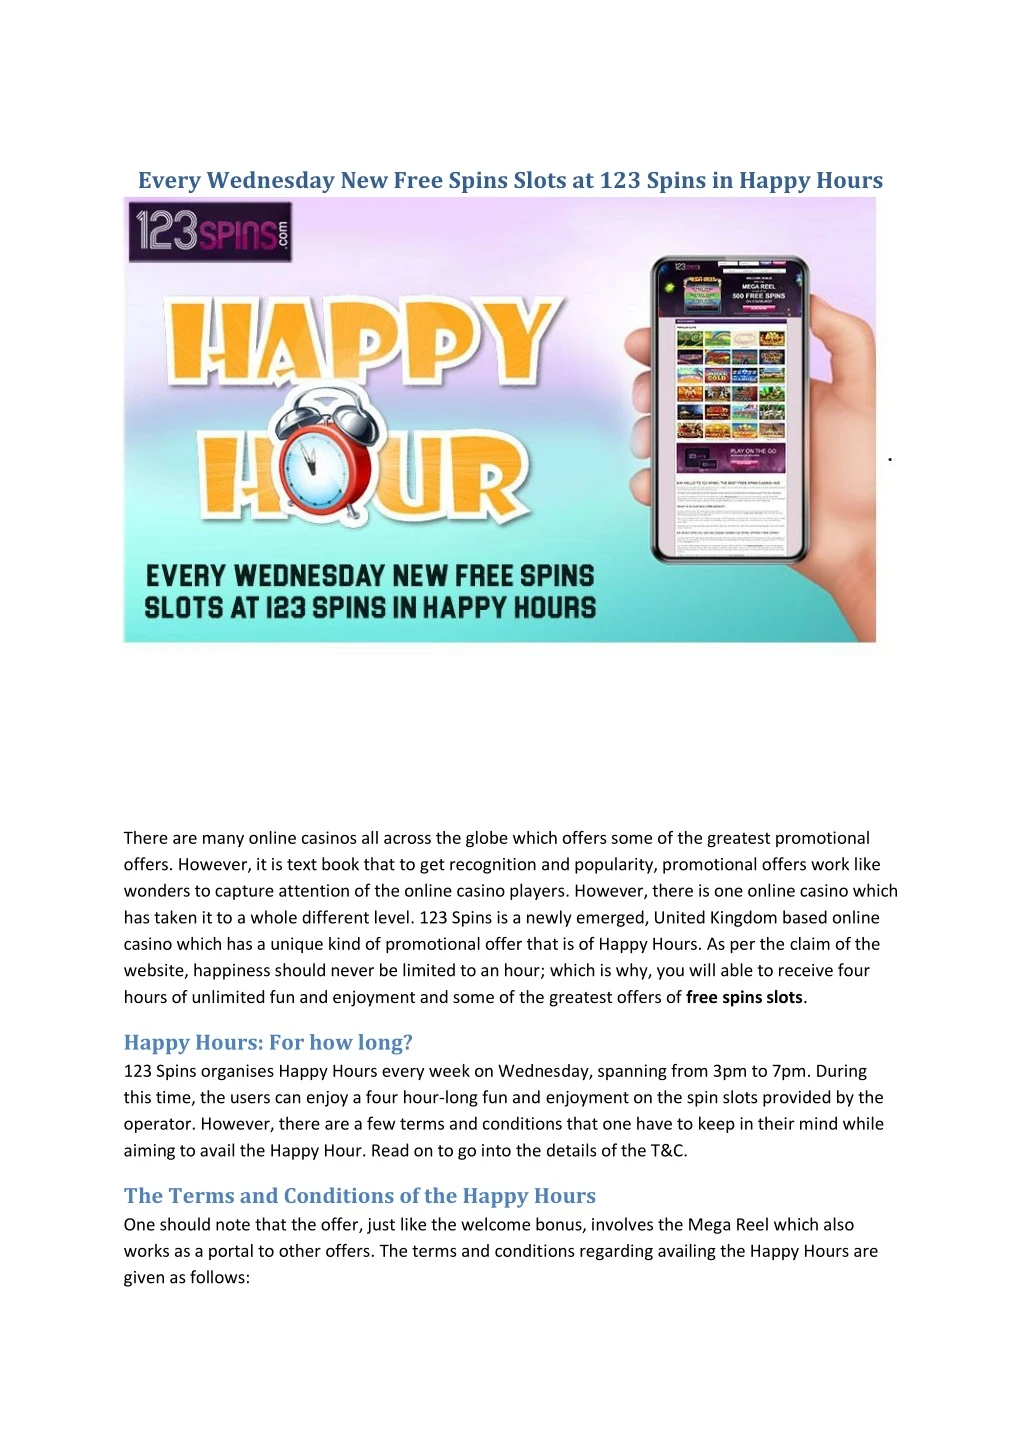 Every Wednesday New Free Spins Slots at 123 Spins in Happy Hours